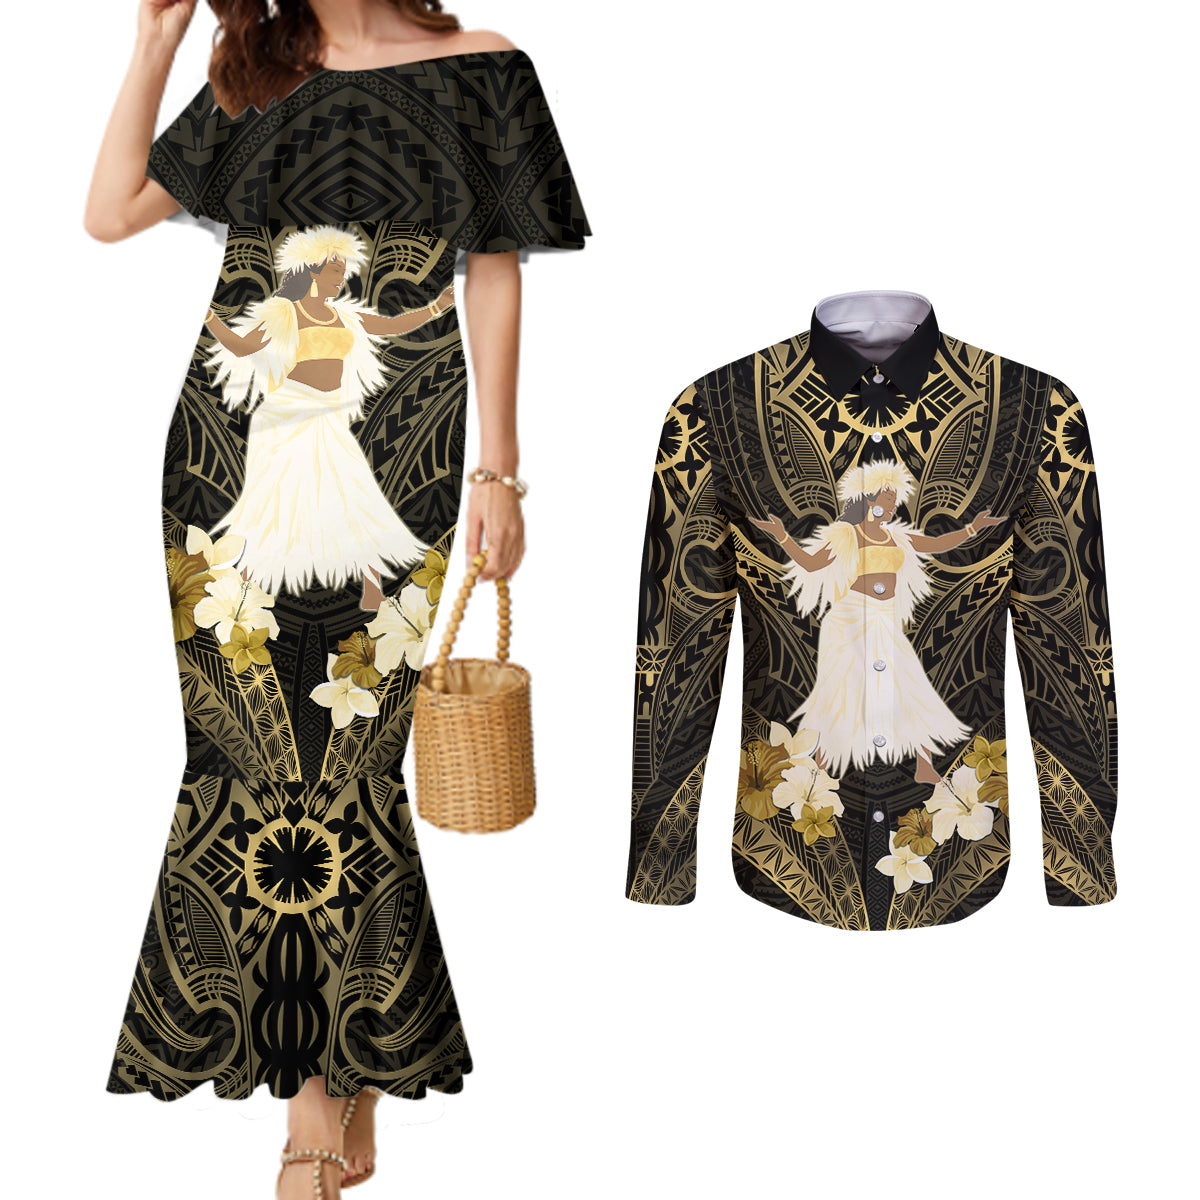 Niue Women's Day Couples Matching Mermaid Dress and Long Sleeve Button Shirt With Polynesian Pattern LT05 Gold - Polynesian Pride